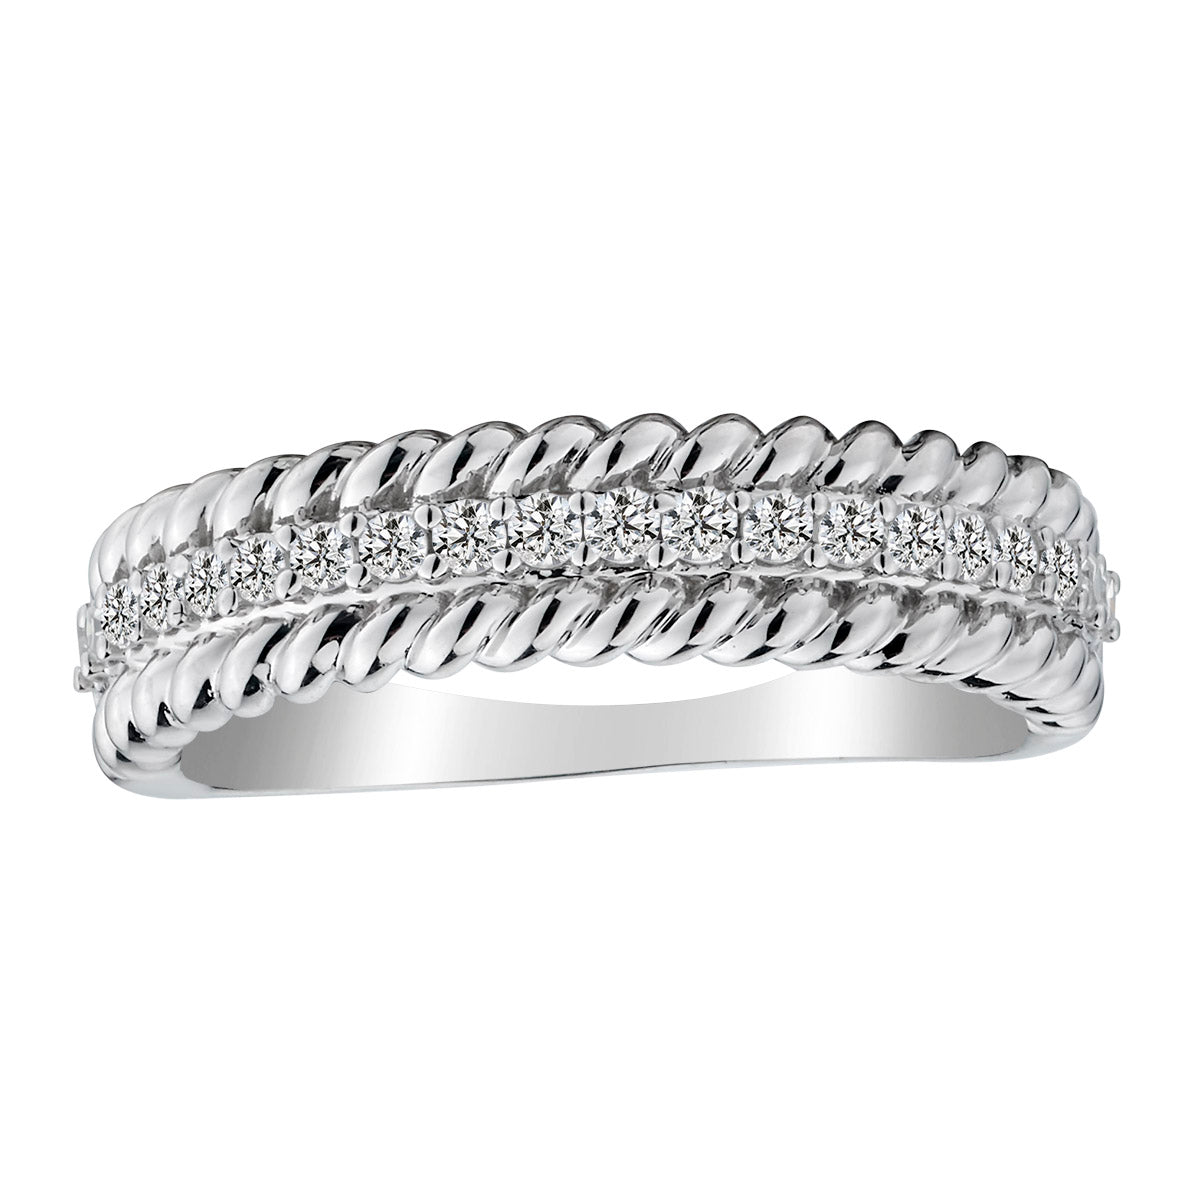 .20 Carat of Diamonds Band, Silver......................NOW